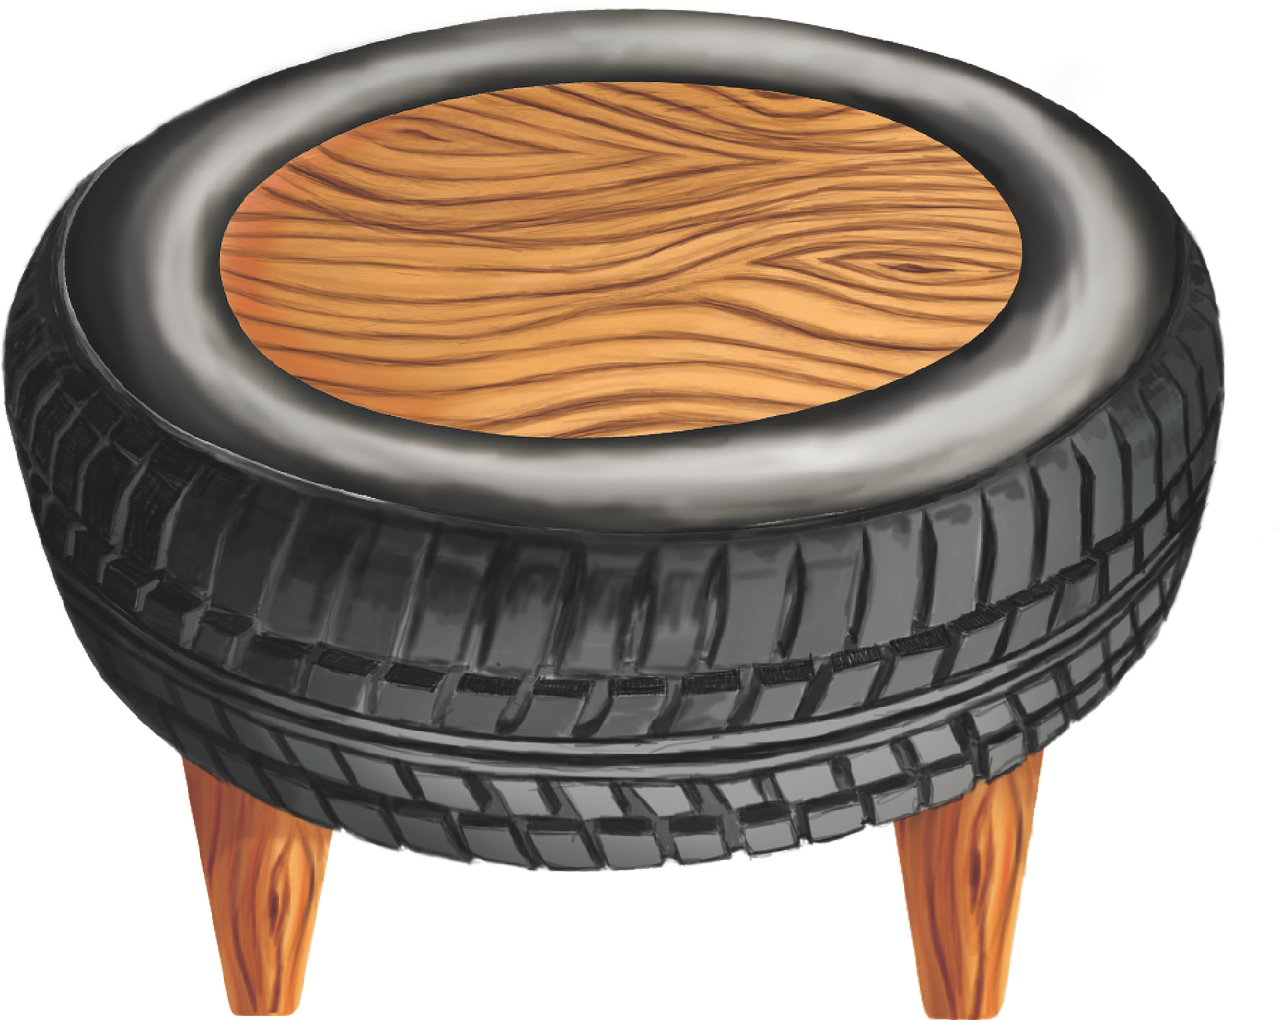 absurd  rubber  stool free photo